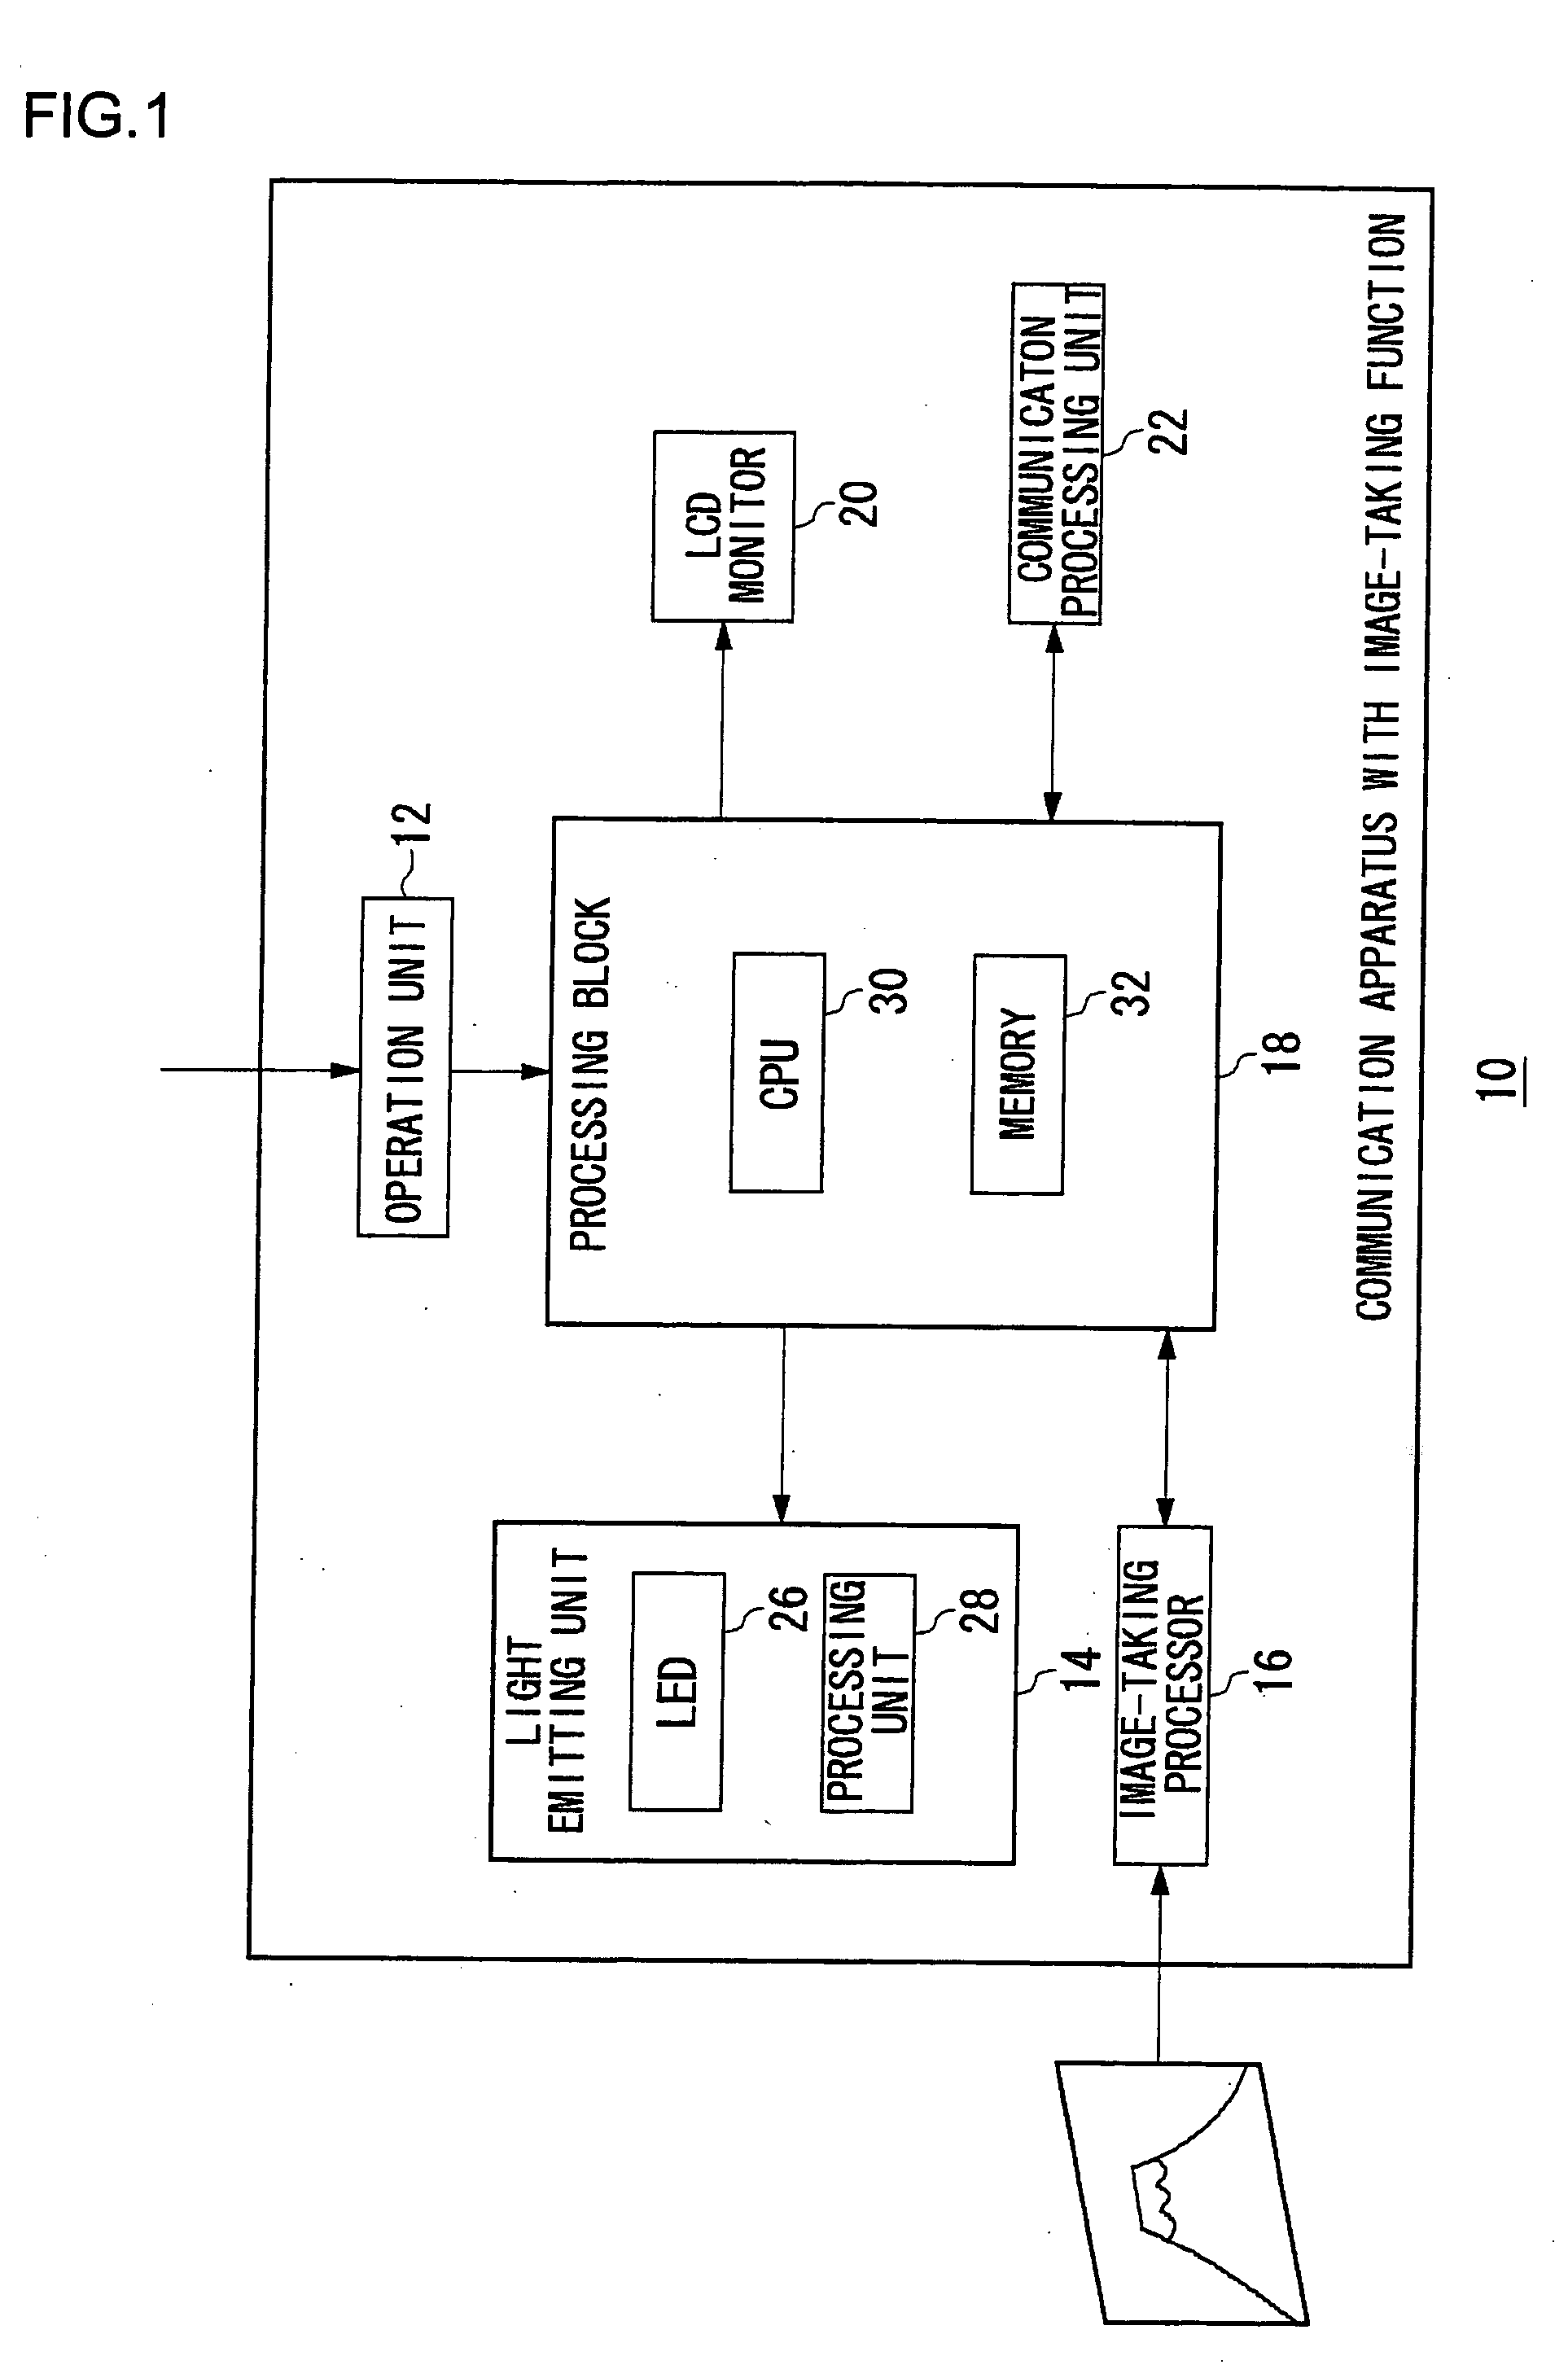 Drive control circuit, emission control circuit, communication apparatus and drive control method